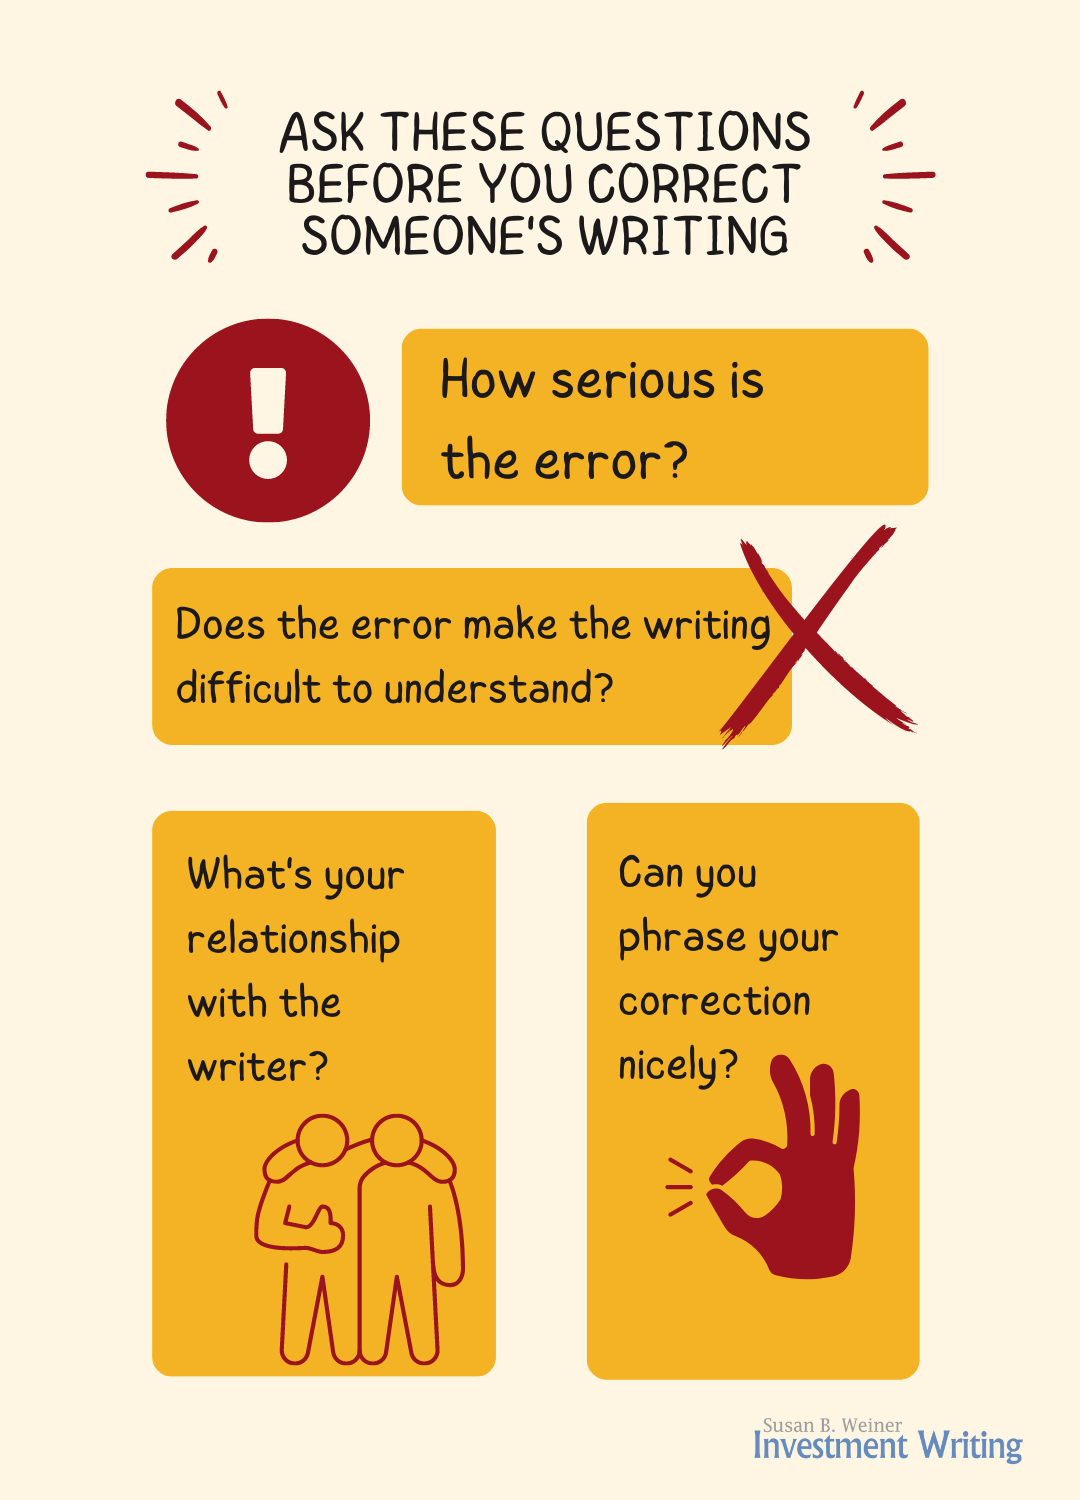 Ask these questions before you correct someone's writing infographic